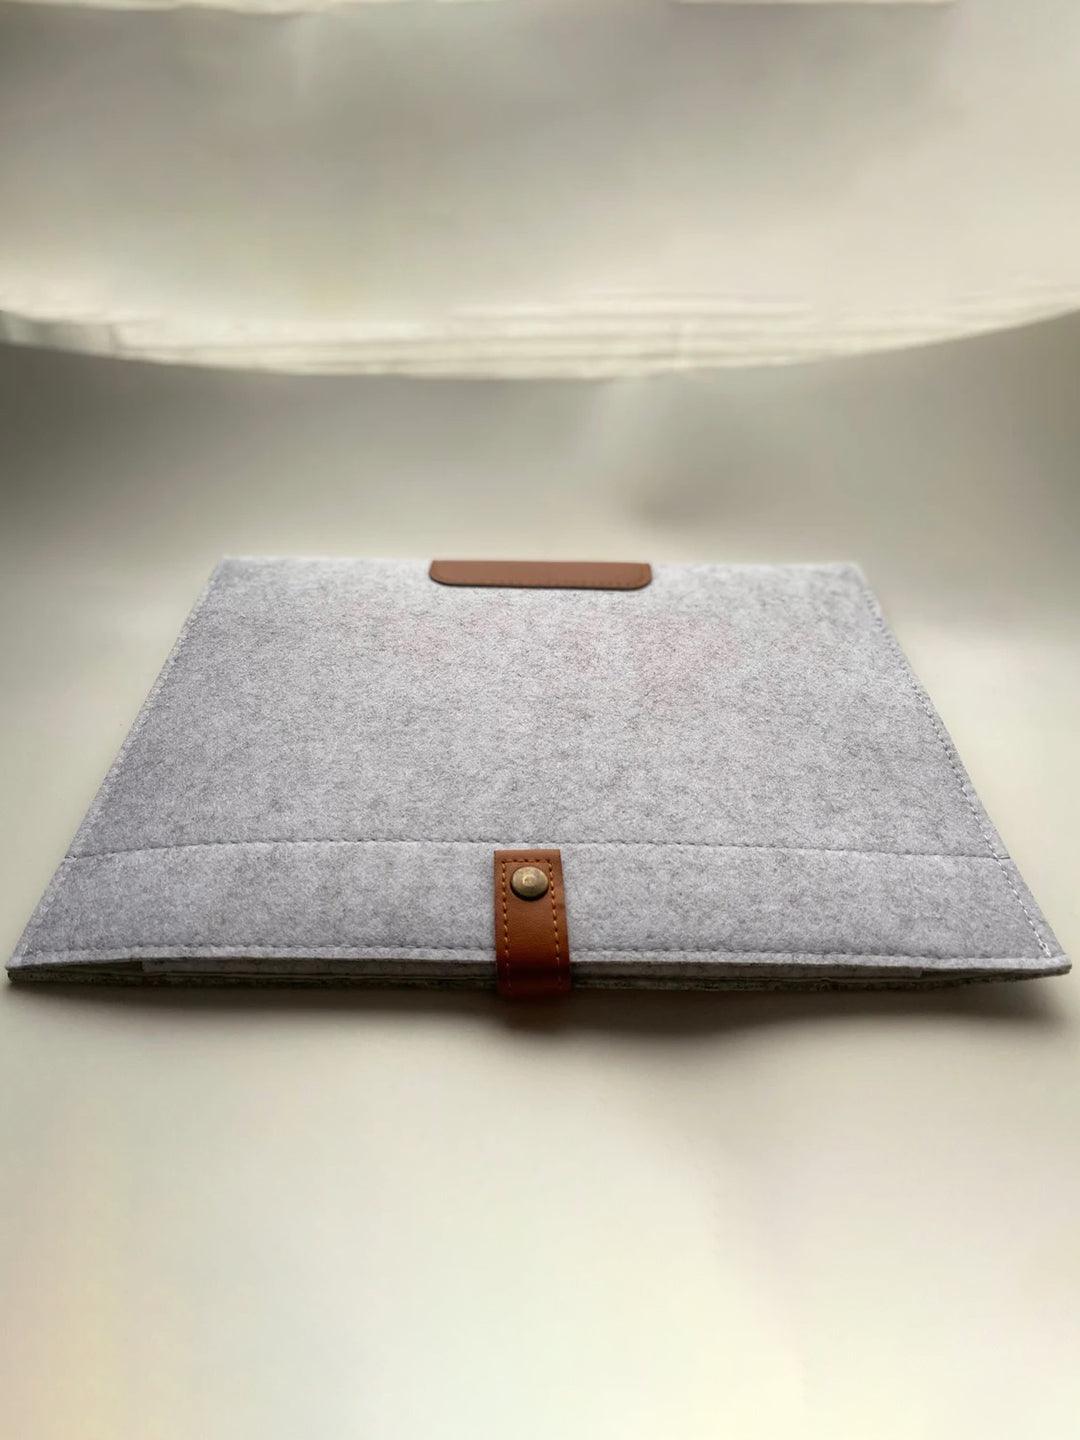 Check out our Regular Style Felt Bag Organizer in Cinnamon Color